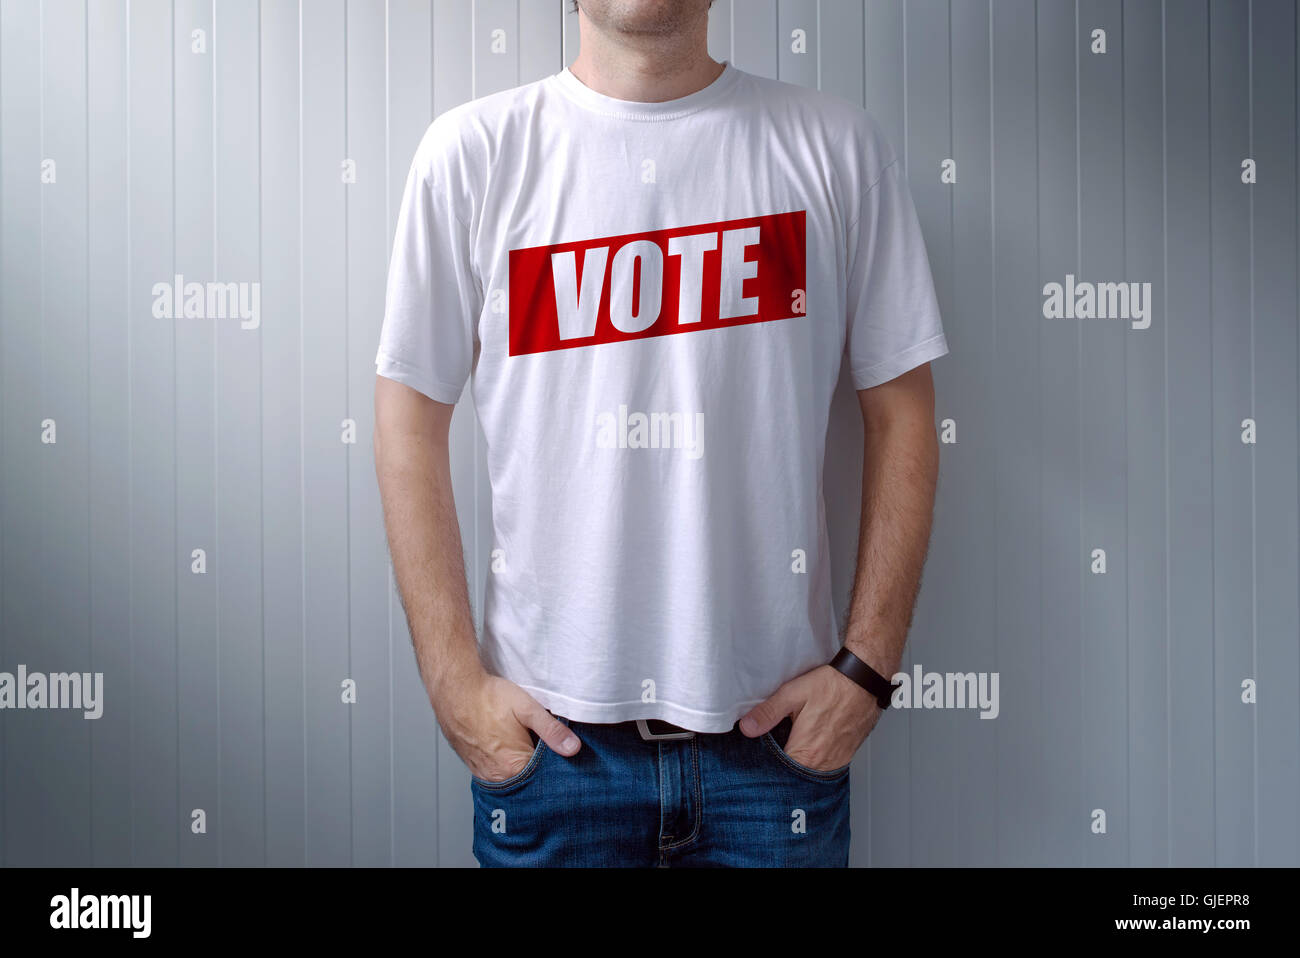 Man wearing t-shirt with Vote label printed on chest, express attitude and opinion on political elections Stock Photo